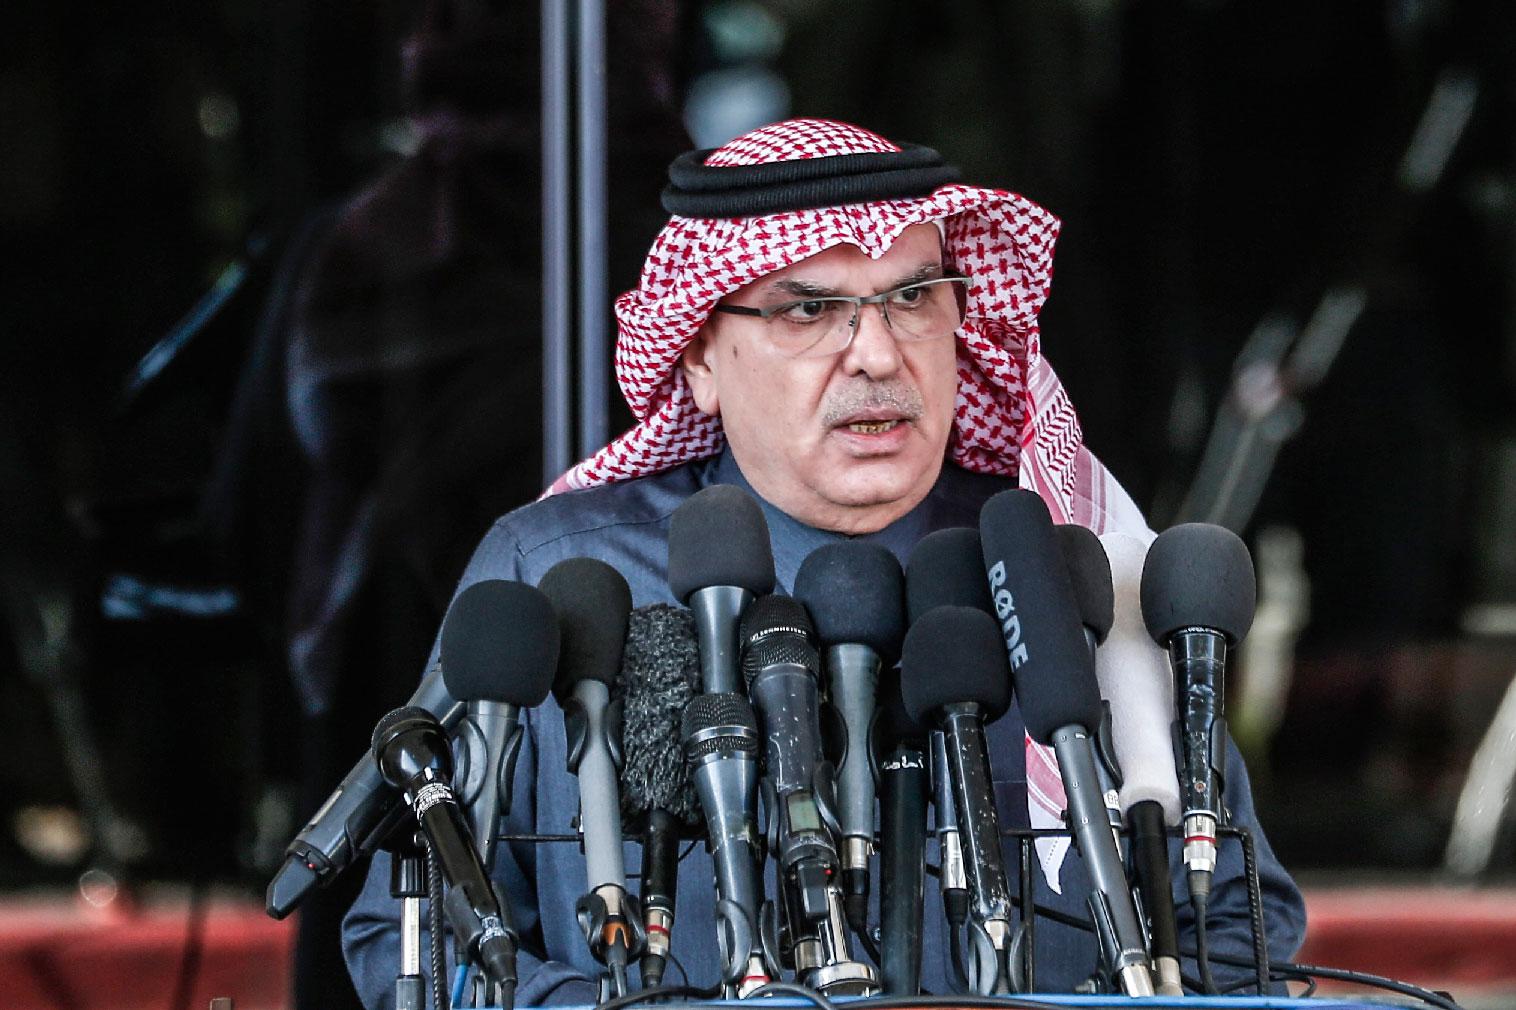 Mohammed al-Emadi, chairman of Qatar's National Committee for the Reconstruction of Gaza, speaks during a press conference in Gaza City on January 25, 2019.